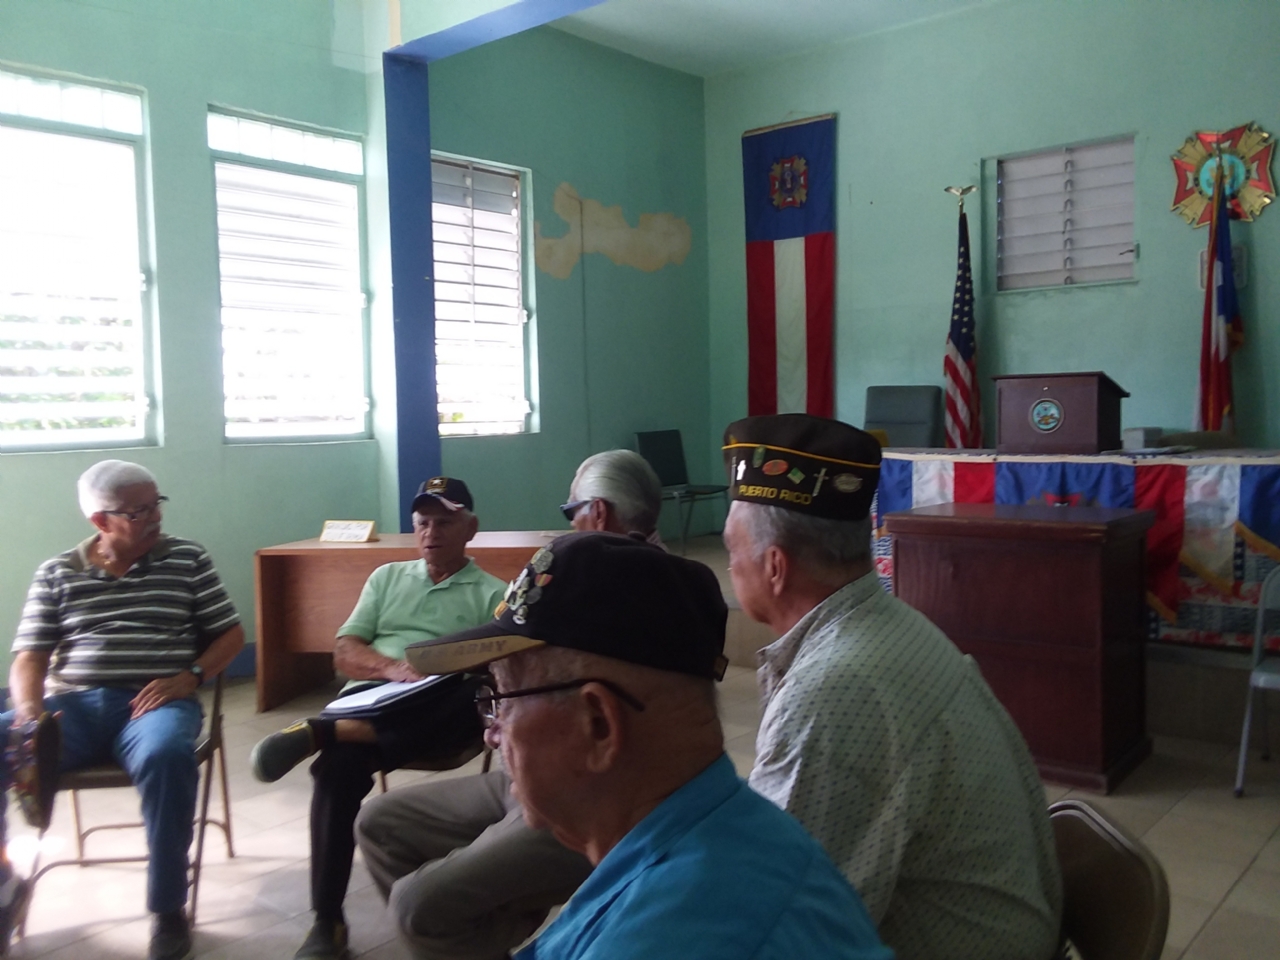 VFW Post 11103 Monthly meeting on Sunday, December 10th 2017.